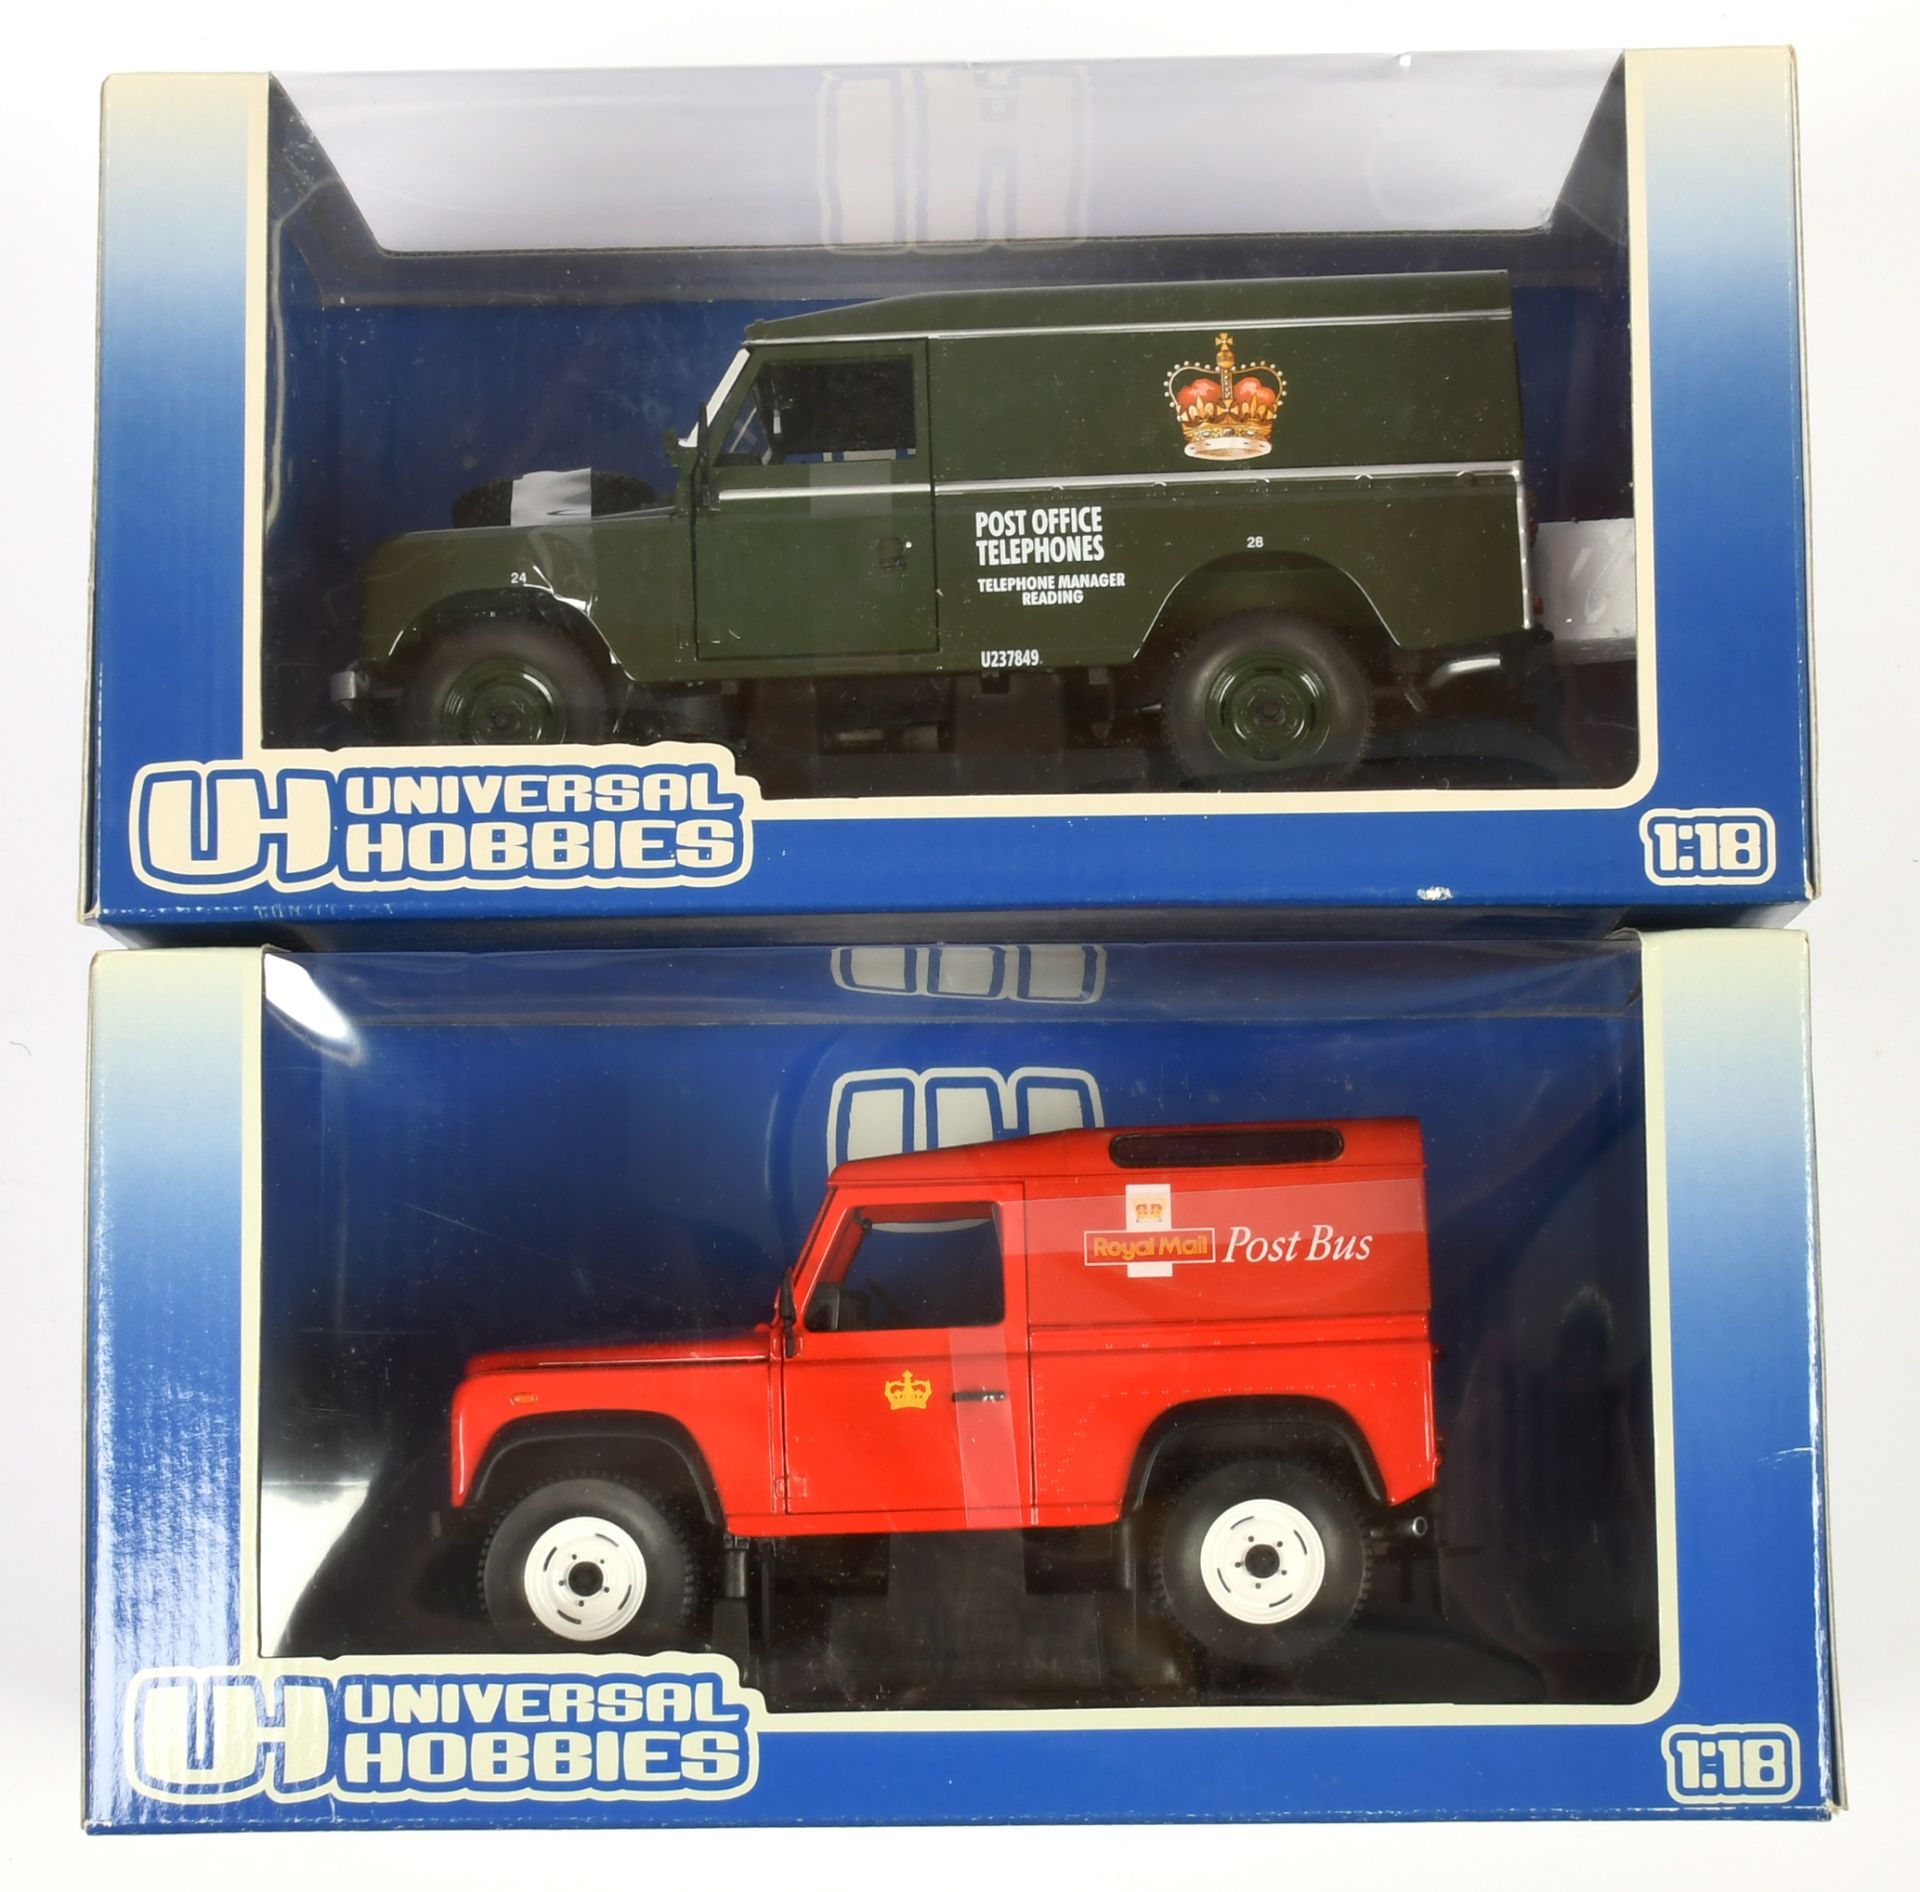 Universal Hobbies (1/18th) land Rover Pair (1) "Royal Mail" SWB - Red and (2) "Post office Teleph... - Image 2 of 2